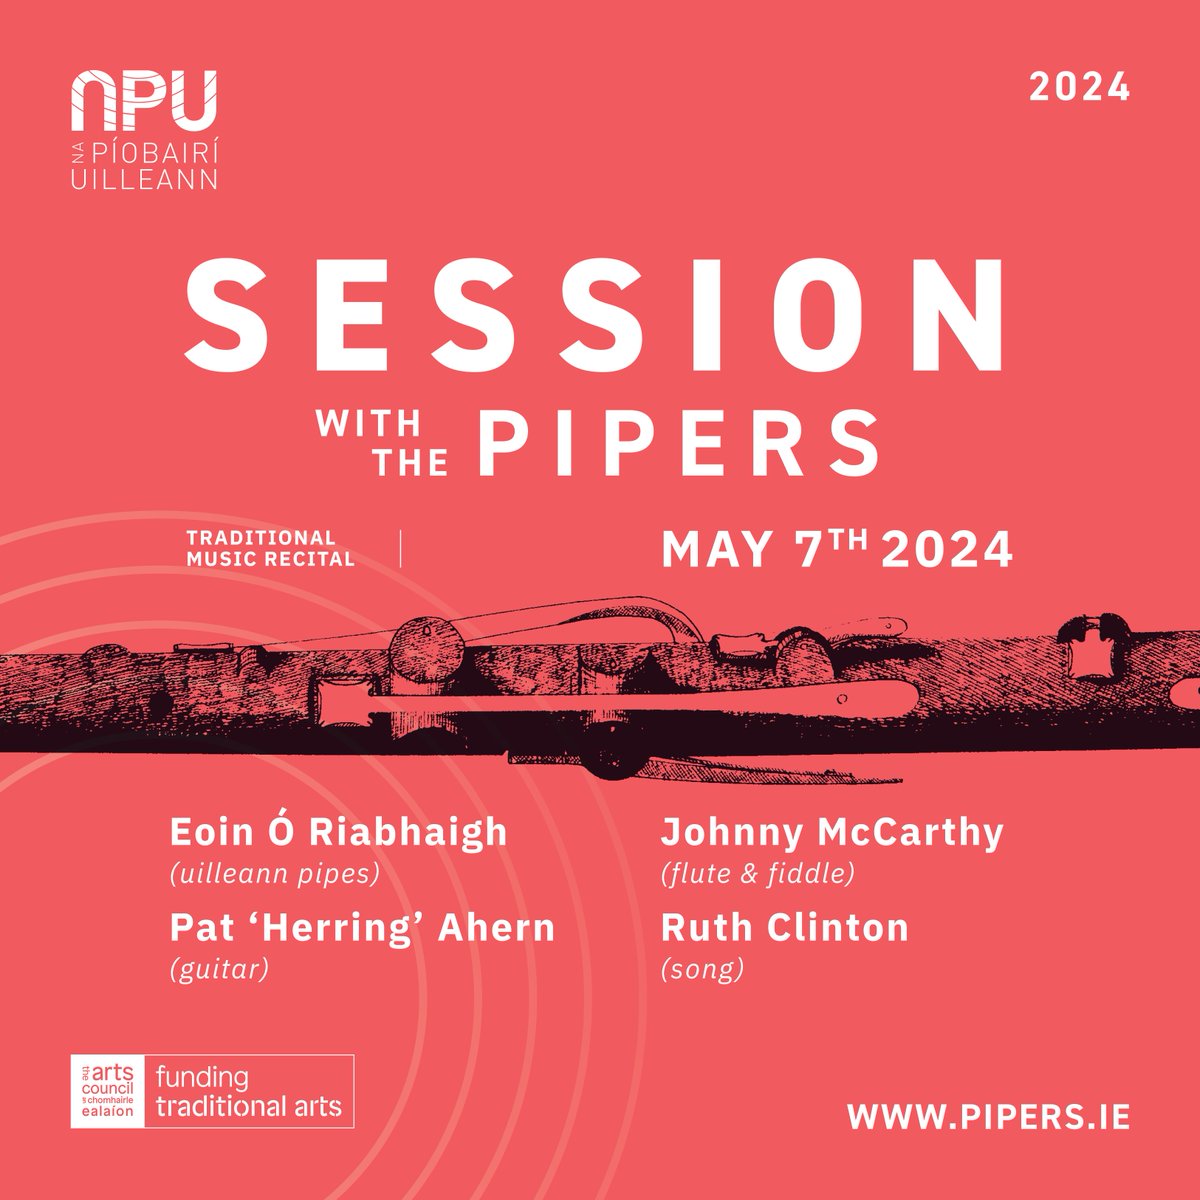 Join us for #SessionwiththePipers in @Cobblestonedub Tues 7th May with Eoin Ó Riabhaigh, Johnny Mc Carthy, Pat 'Herring' Ahern & Ruth Clinton!

Tickets: loom.ly/NhRtXiQ

#napiobairi #uilleann #sharingthesound @artscouncil_ie